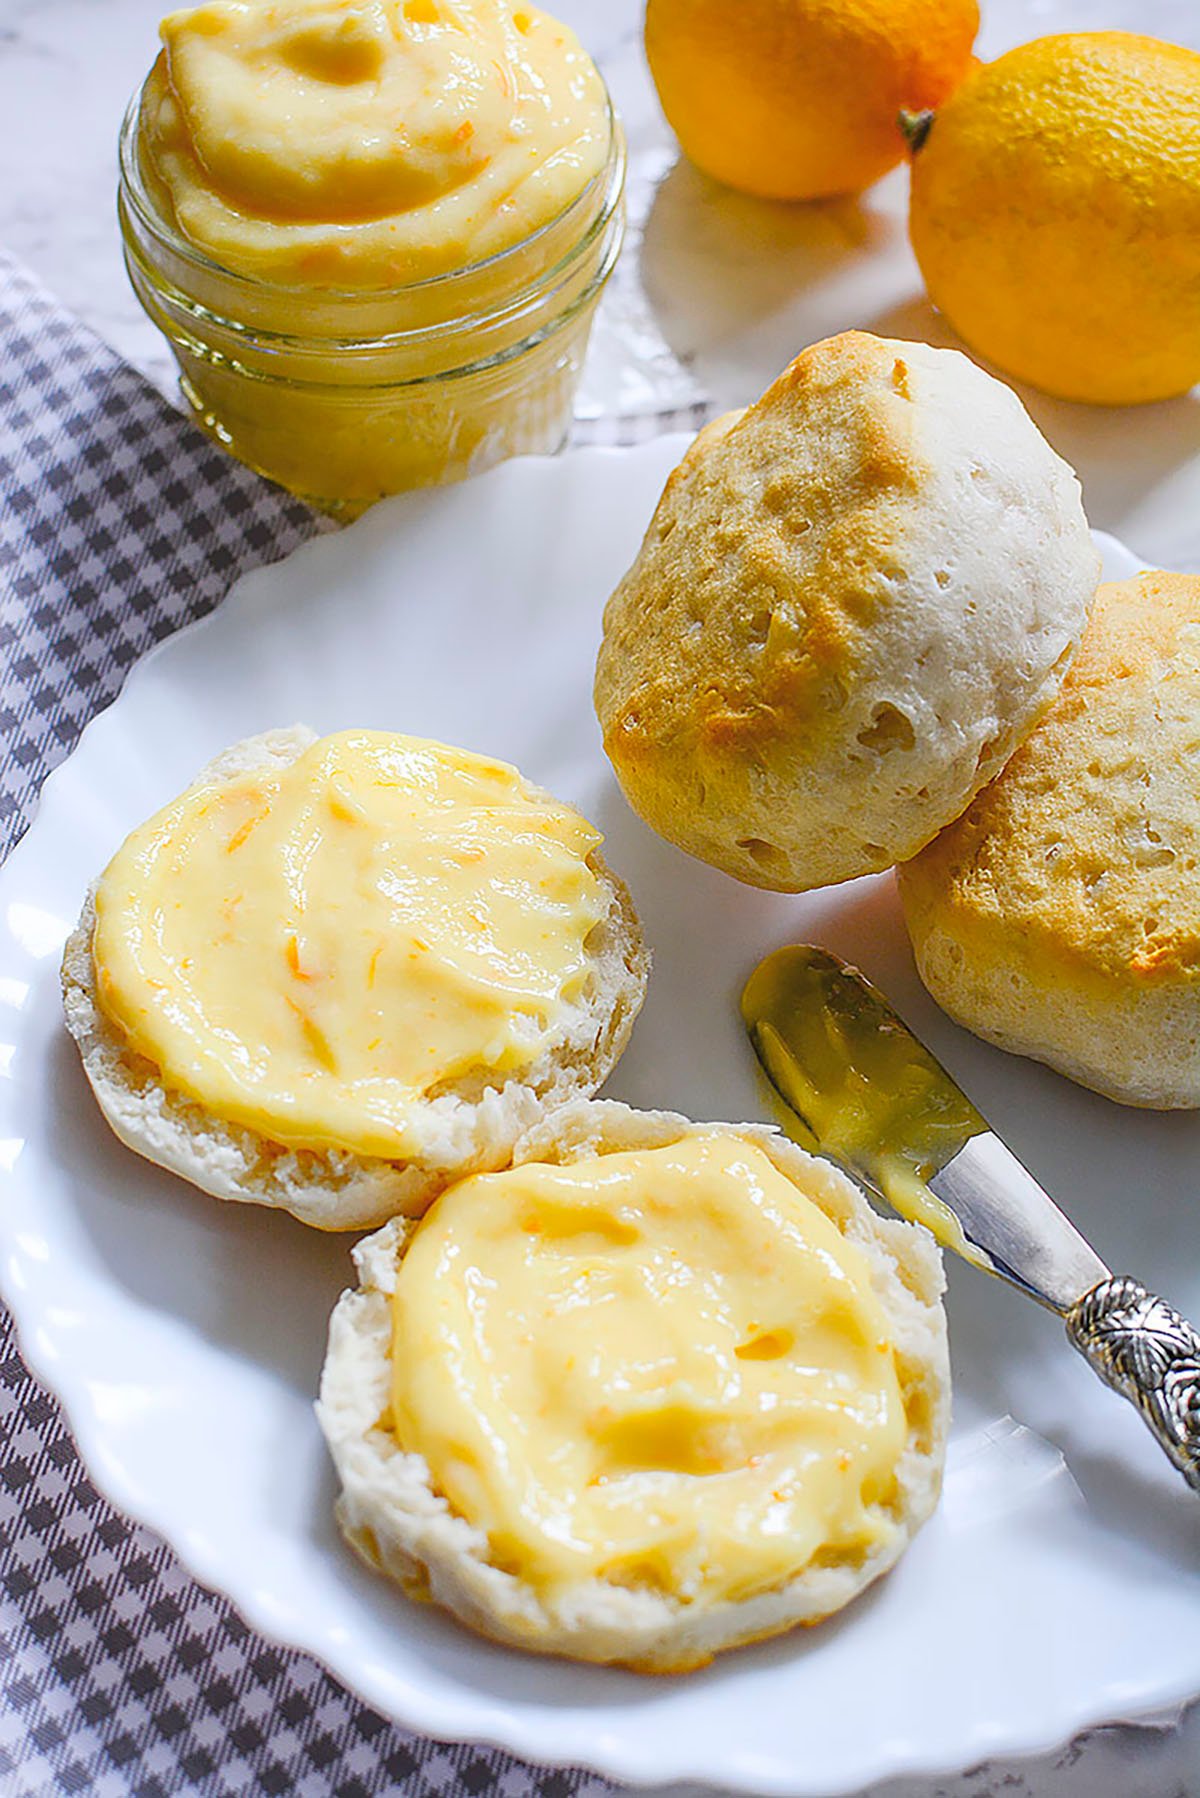 Meyer lemon curd spread on a biscuit with two other biscuits beside it and the glass container of curd above the plate.